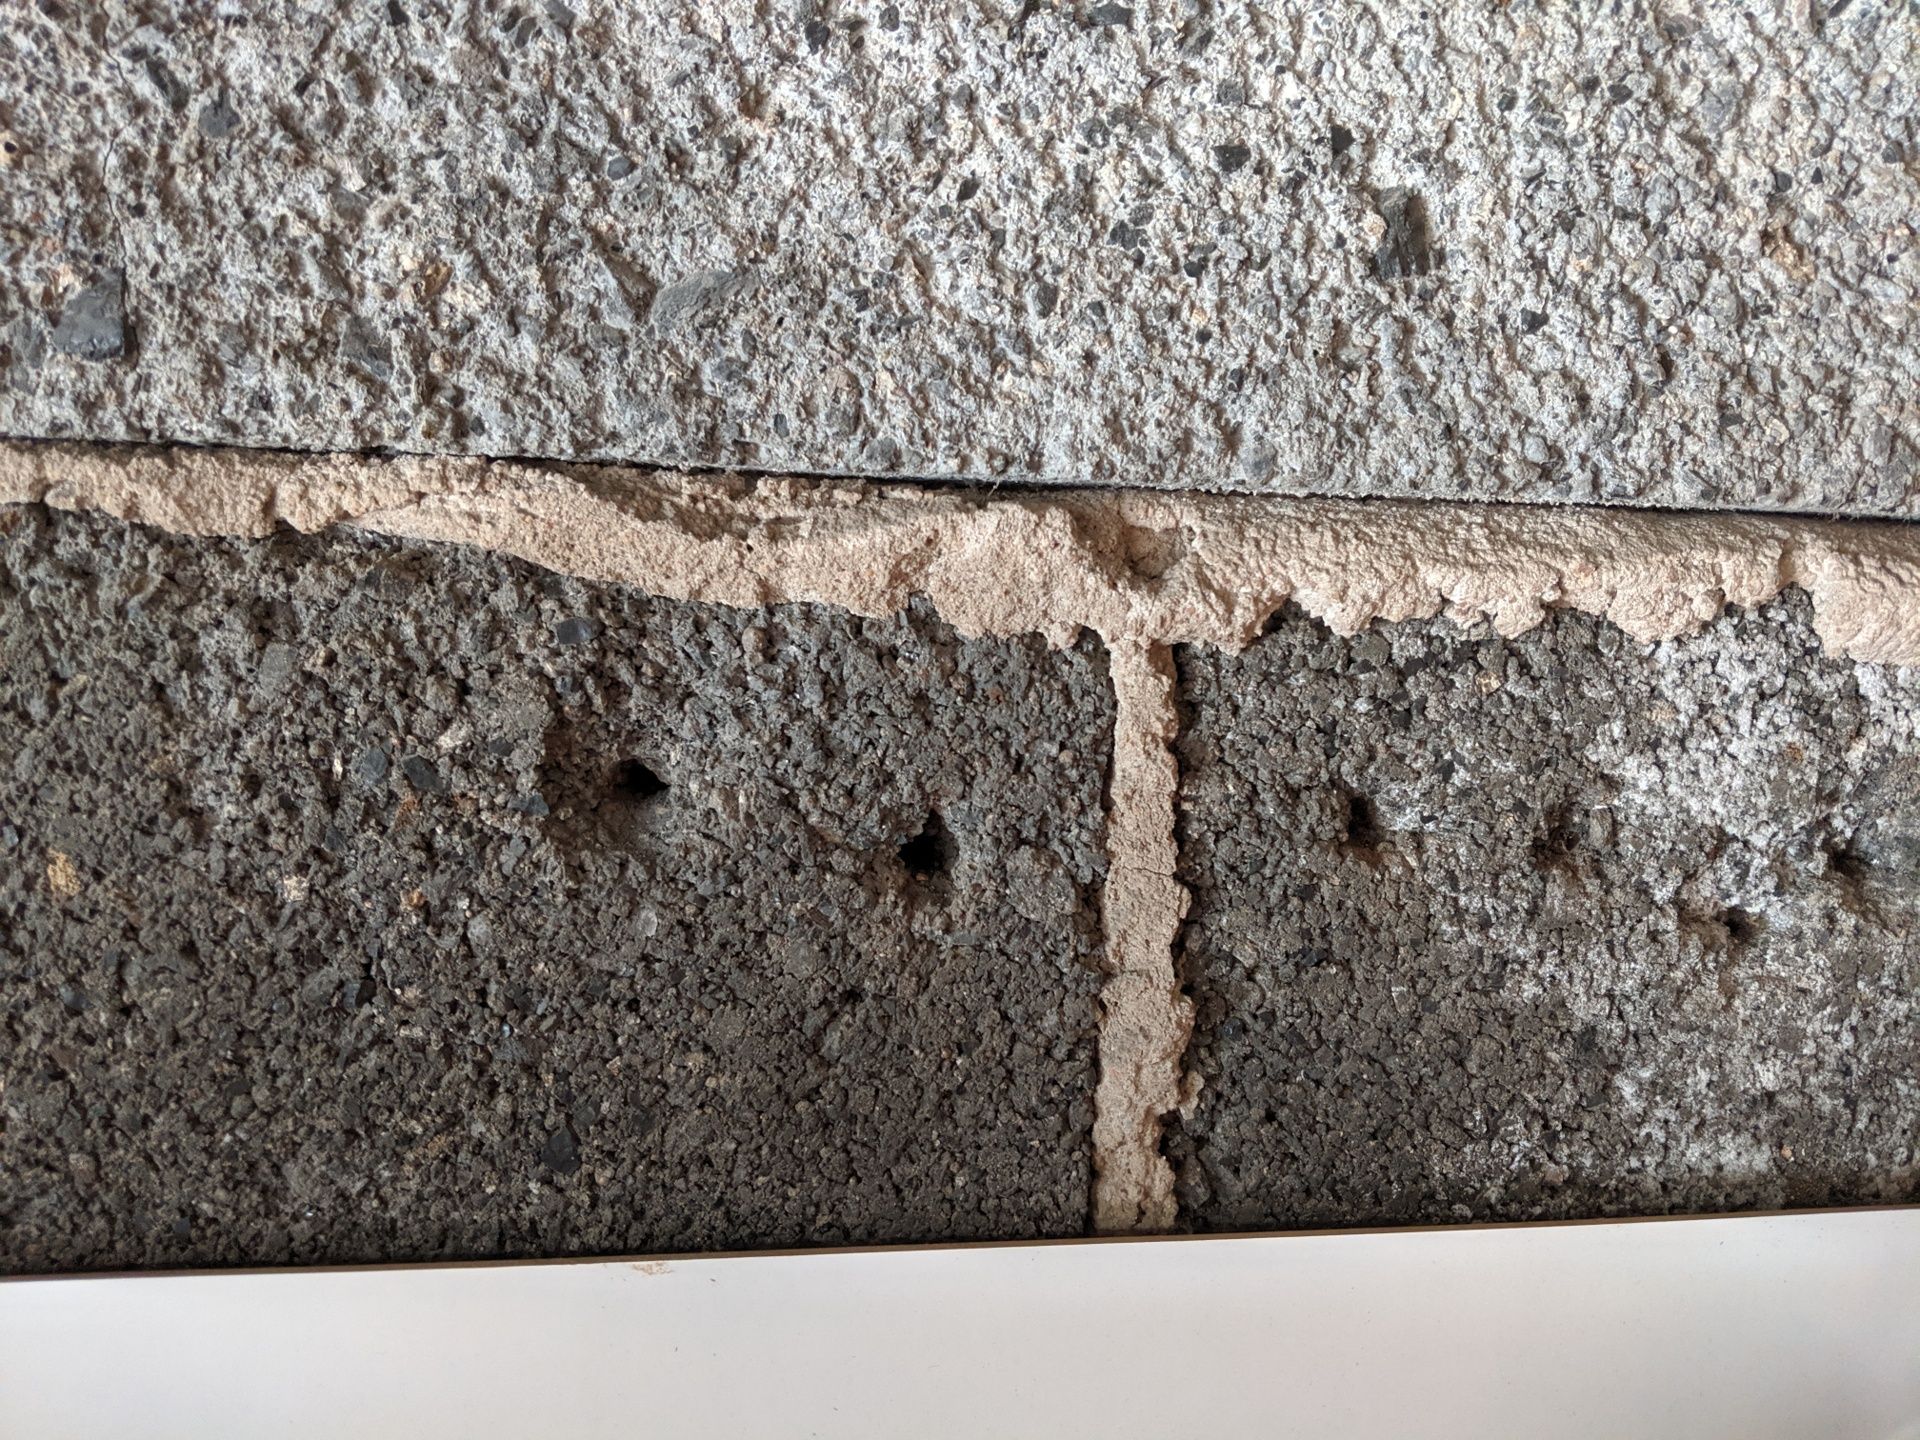 Solved: How to fill holes in concrete blocks | Bunnings Workshop community